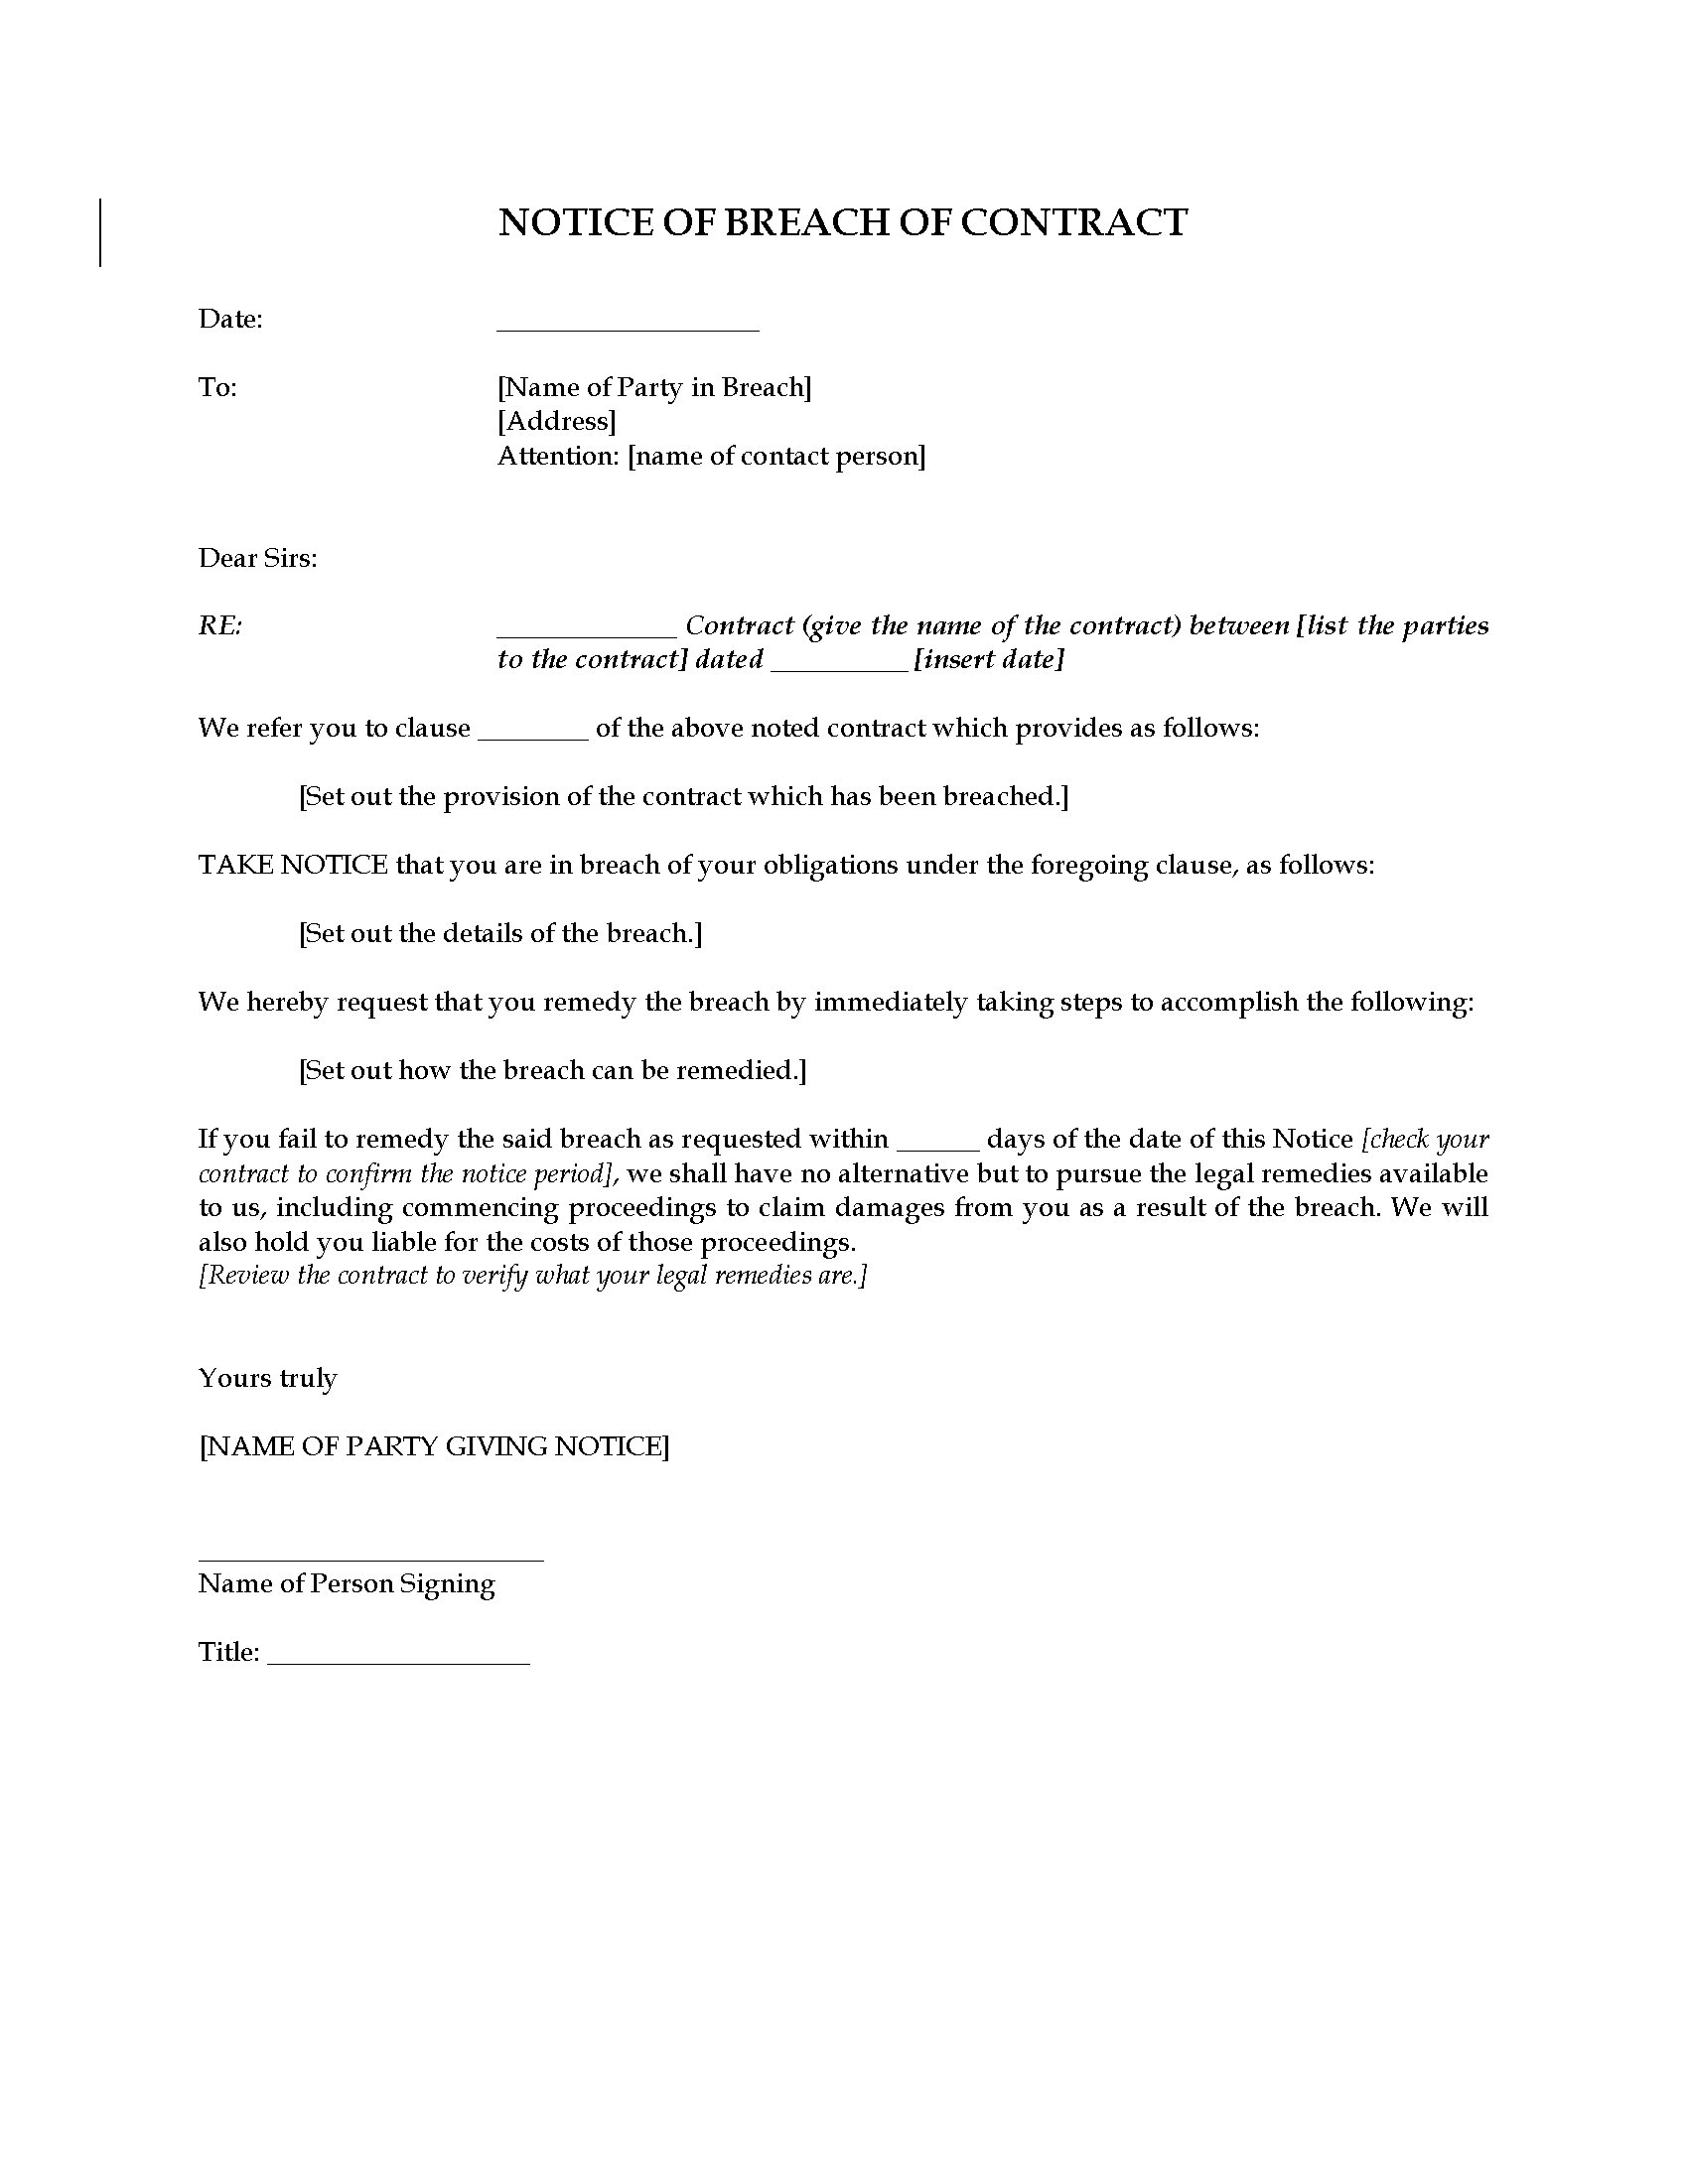 Notice of Breach of Contract Legal Forms and Business Templates